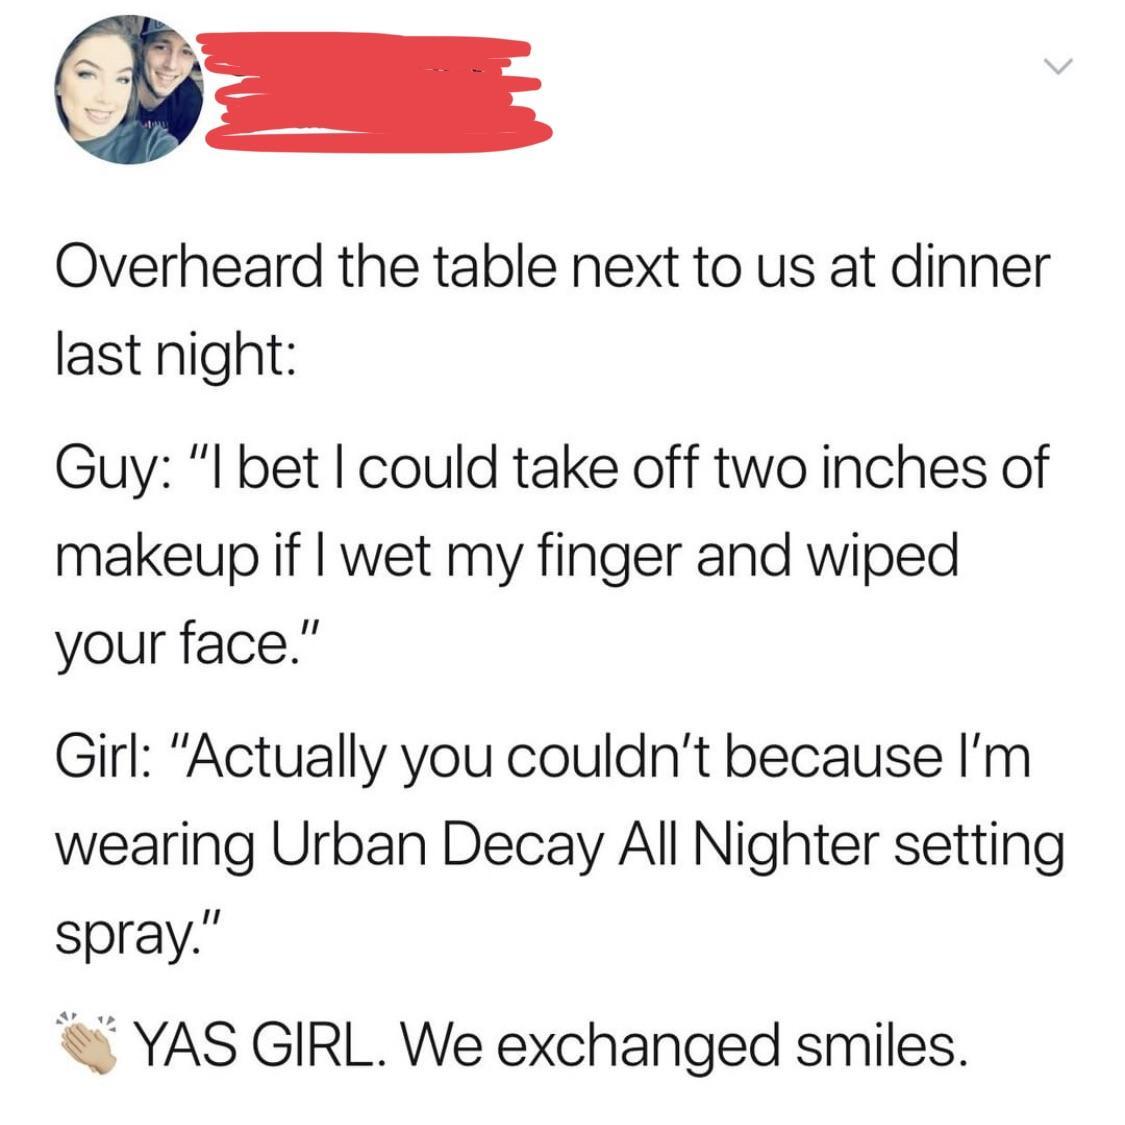 Fetus - Overheard the table next to us at dinner last night Guy "I bet I could take off two inches of makeup if I wet my finger and wiped your face." Girl "Actually you couldn't because I'm wearing Urban Decay All Nighter setting spray." Yas Girl. We exch